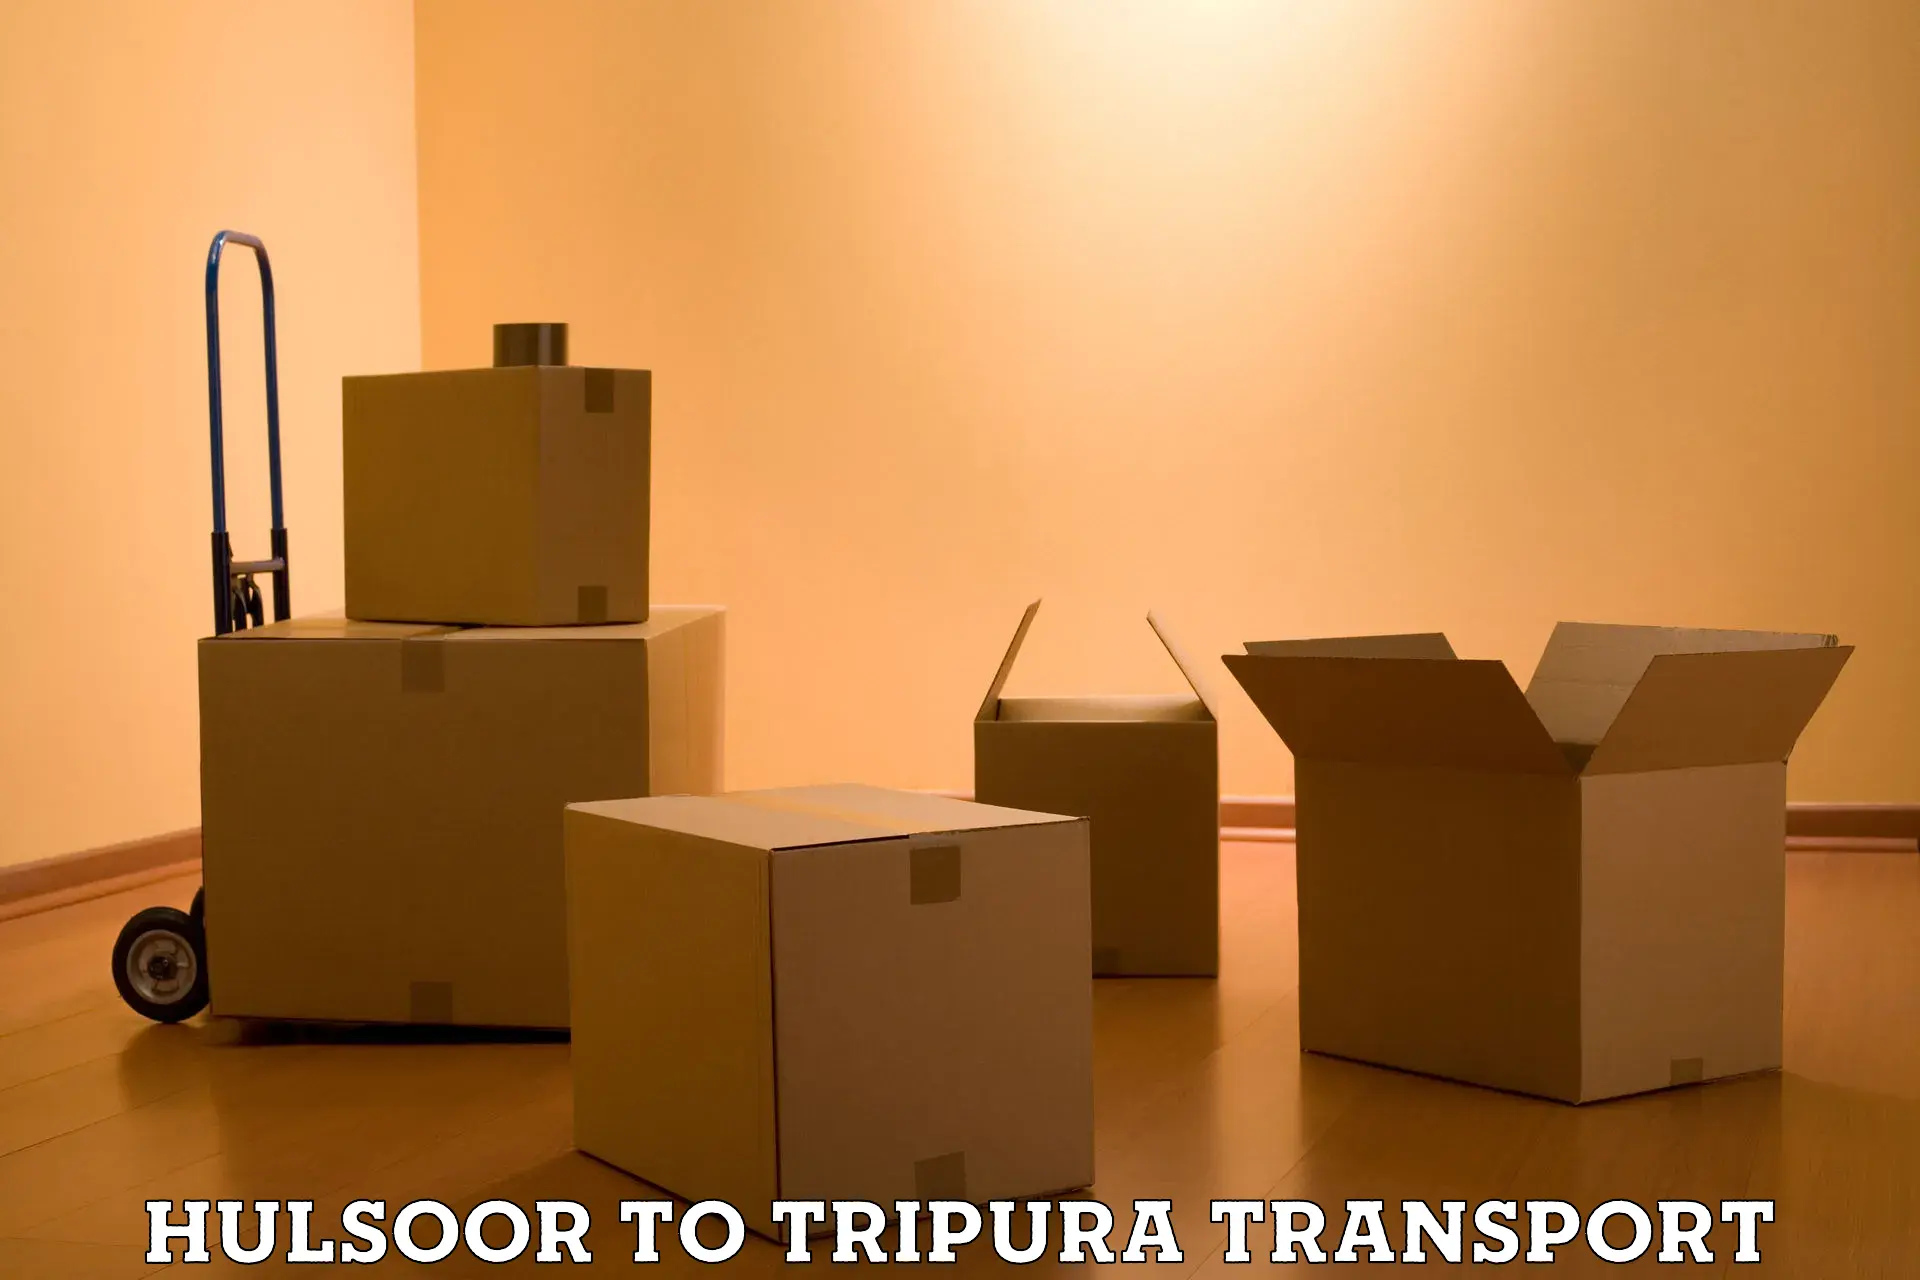 Express transport services Hulsoor to Tripura